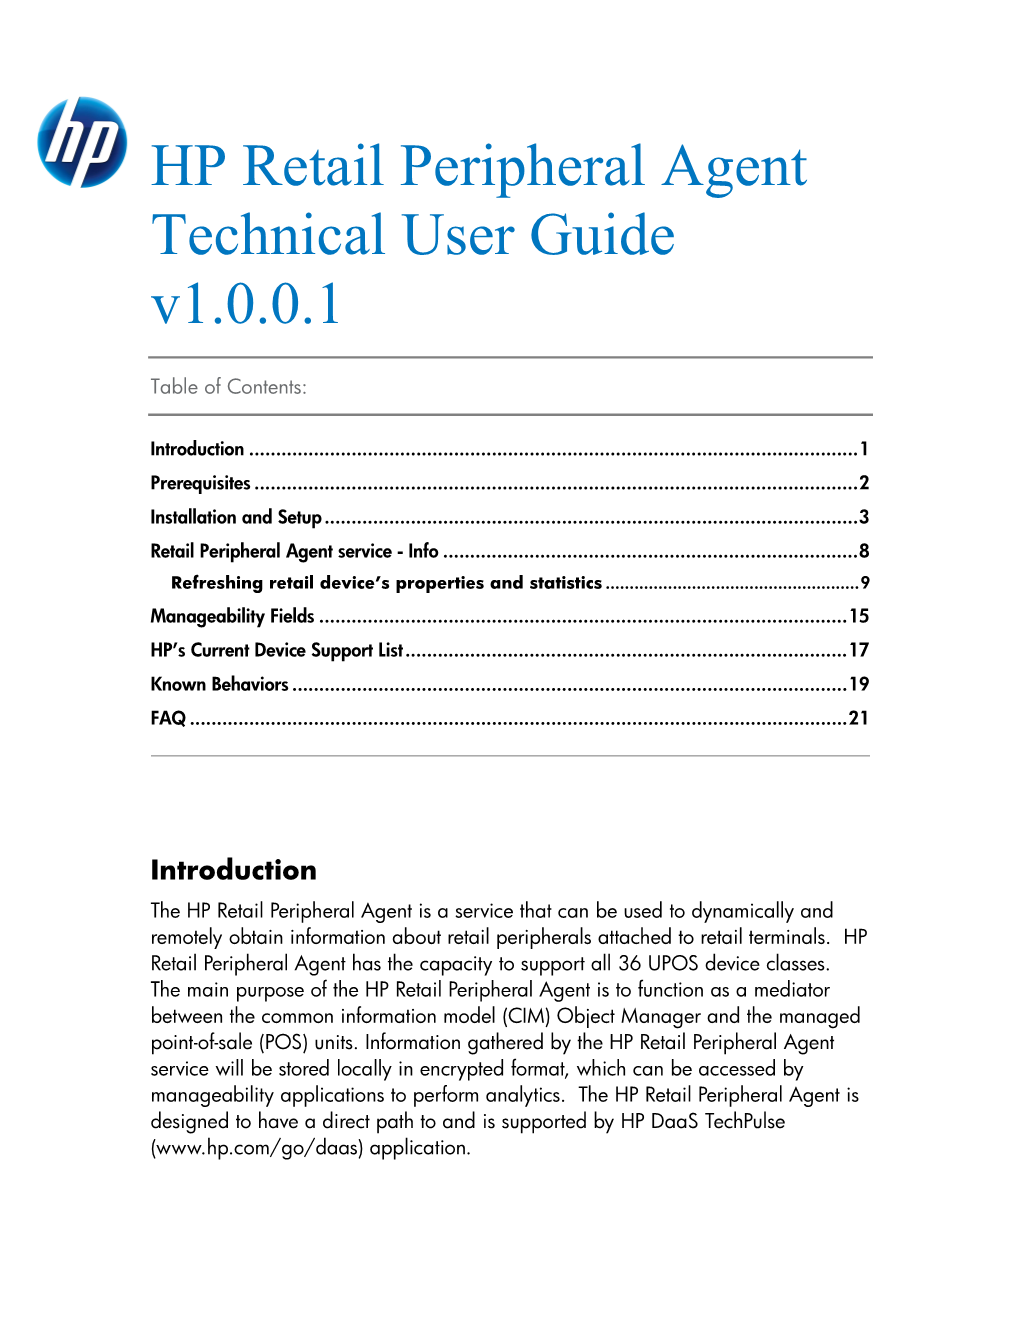 HP Retail Peripheral Agent Technical User Guide V1.0.0.1